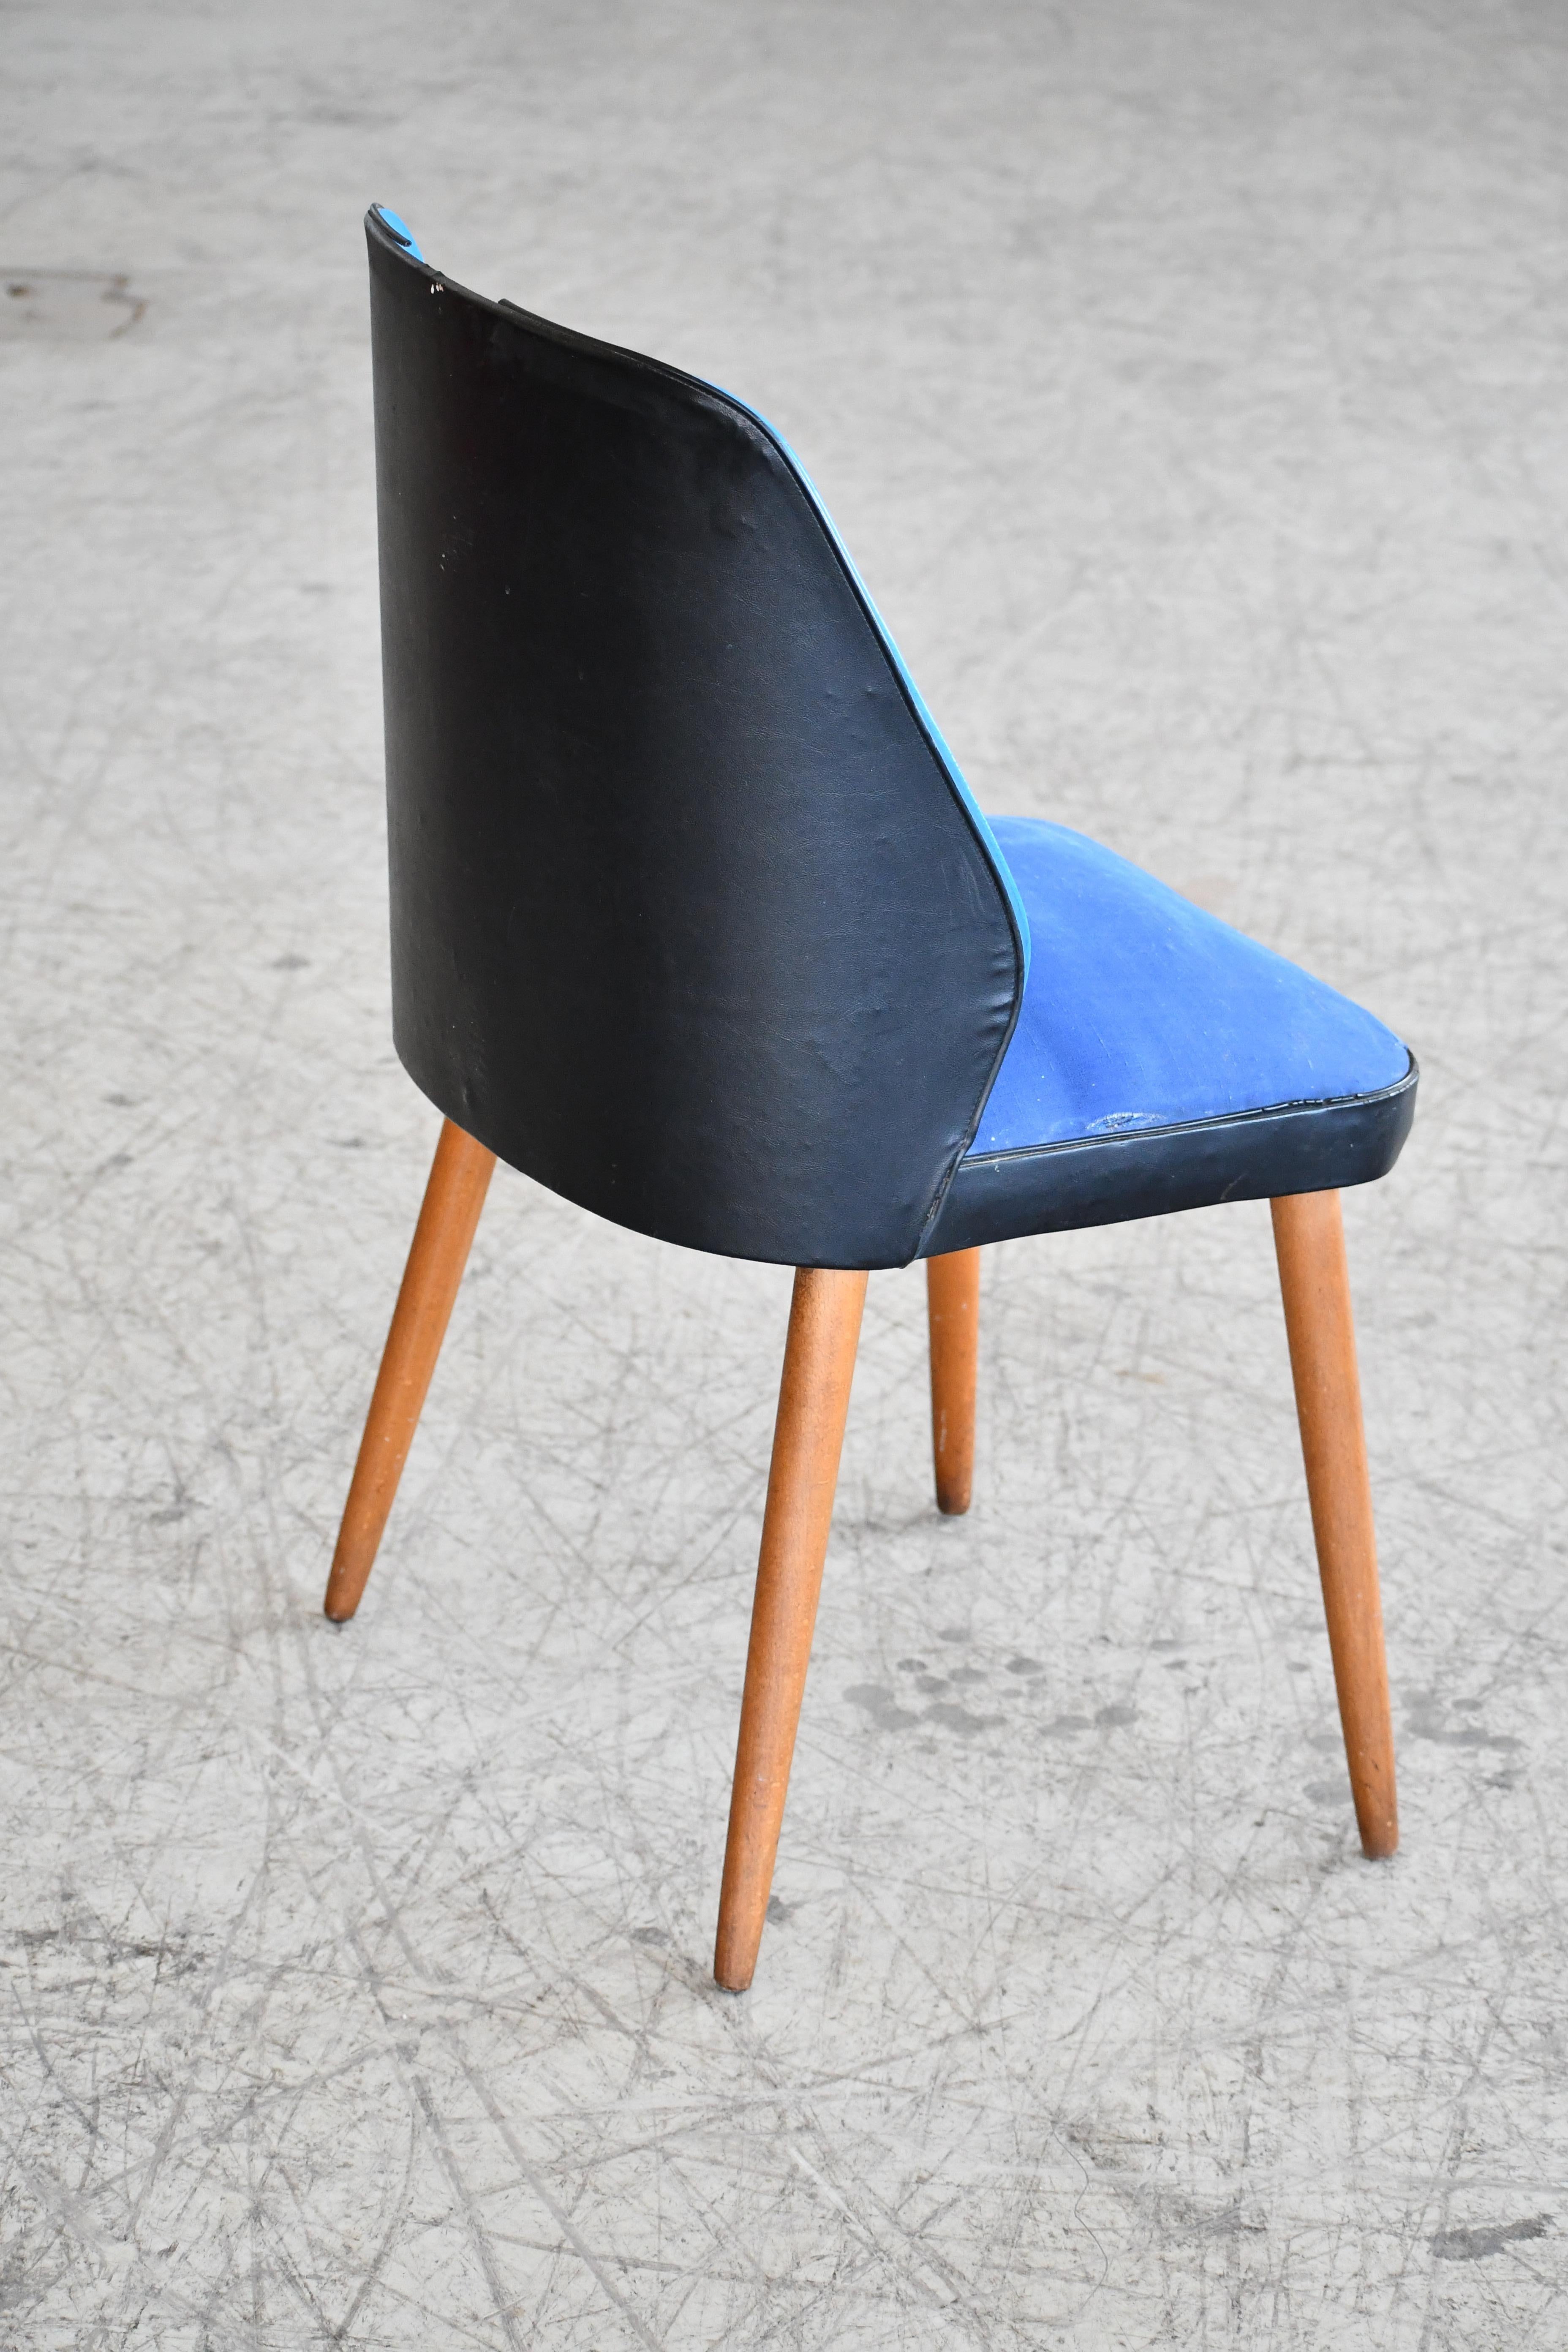 Mid-20th Century Danish Midcentury Accent or Vanity Chair  For Sale